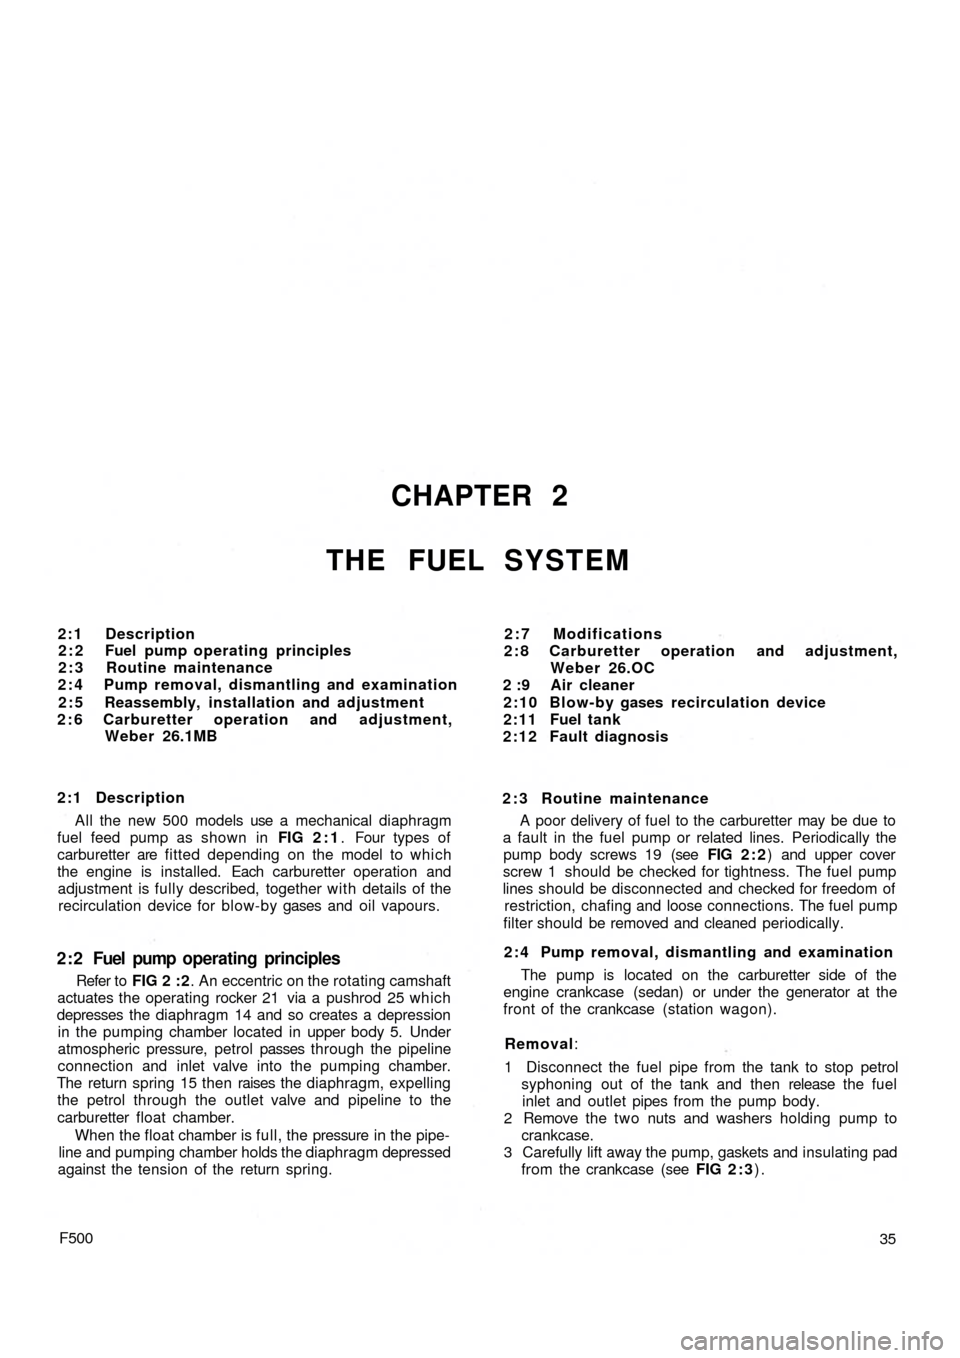 FIAT 500 1969 1.G Workshop Manual CHAPTER 2
THE FUEL SYSTEM
2:1 Description
2 : 2 Fuel pump operating principles
2 : 3 Routine maintenance
2 : 4 Pump removal, dismantling and examination
2 : 5 Reassembly, installation and adjustment
2